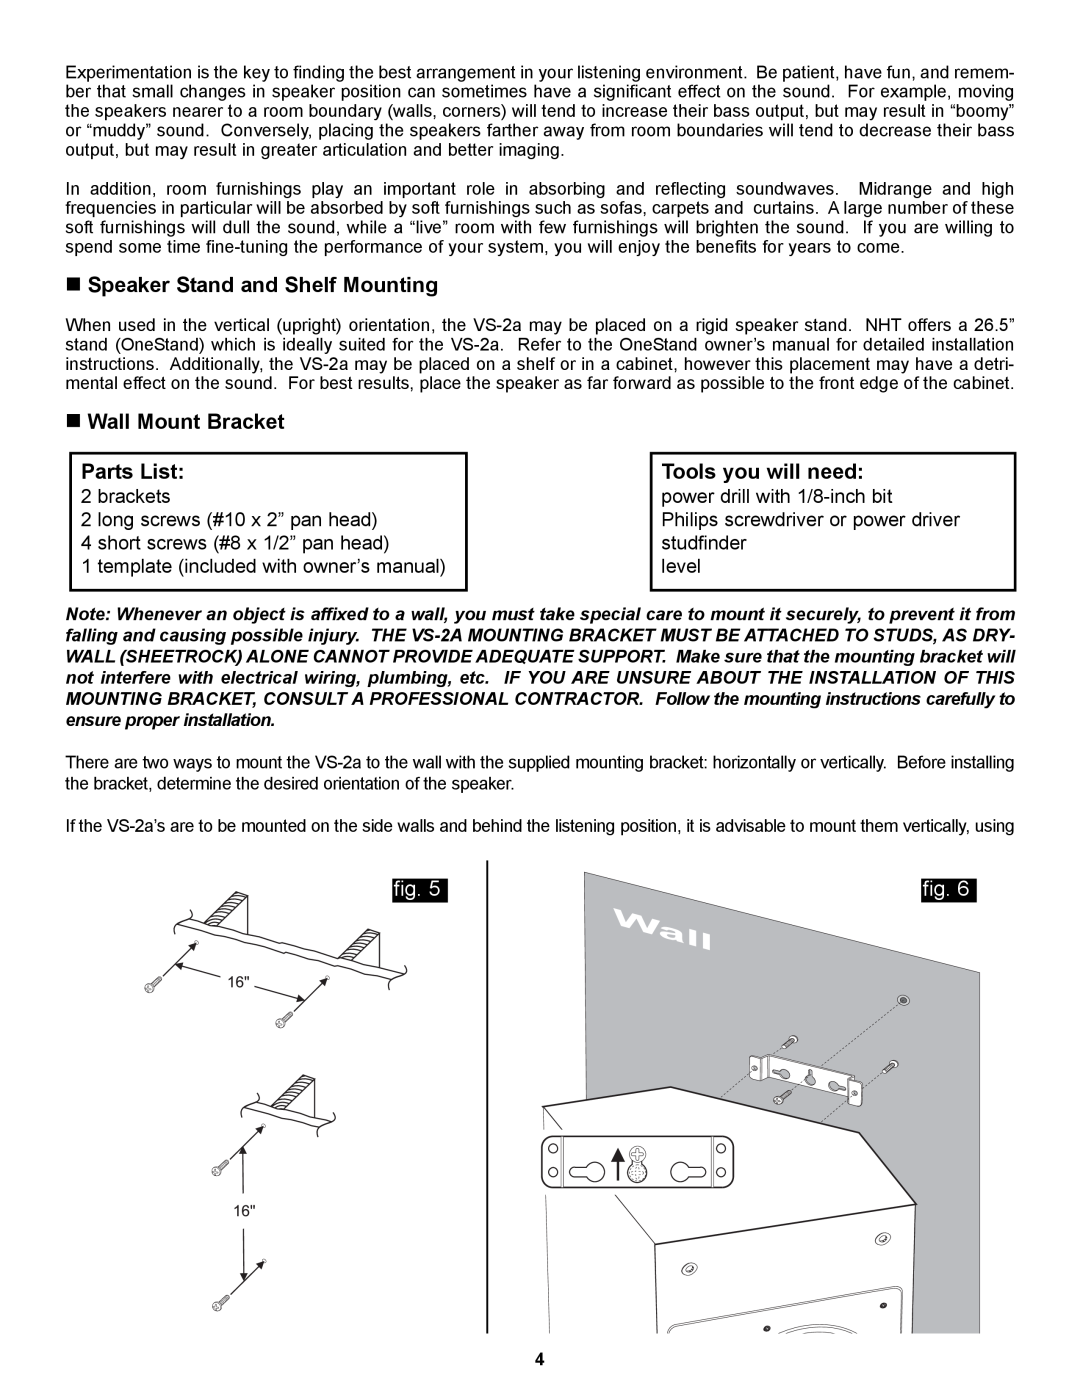 NHT VS-2a owner manual „Speaker Stand and Shelf Mounting, „Wall Mount Bracket Parts List, Tools you will need, fig 